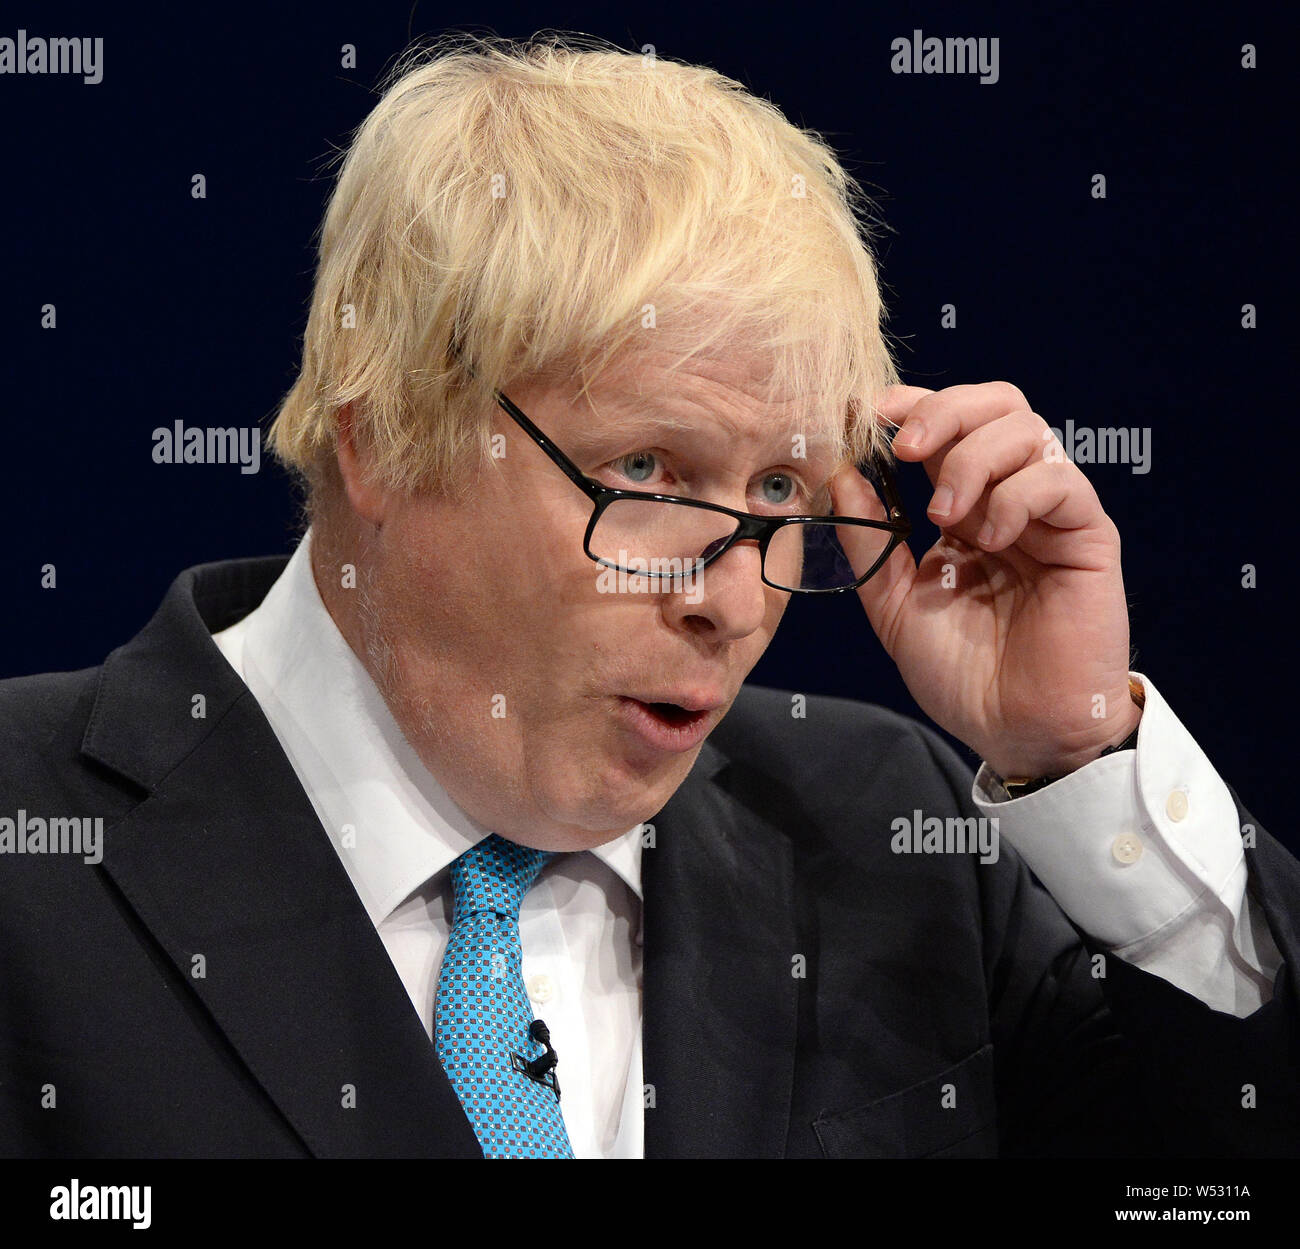 Boris Johnson during his speech at Tory Conference, Tuesday Manchester 2015 Stock Photo